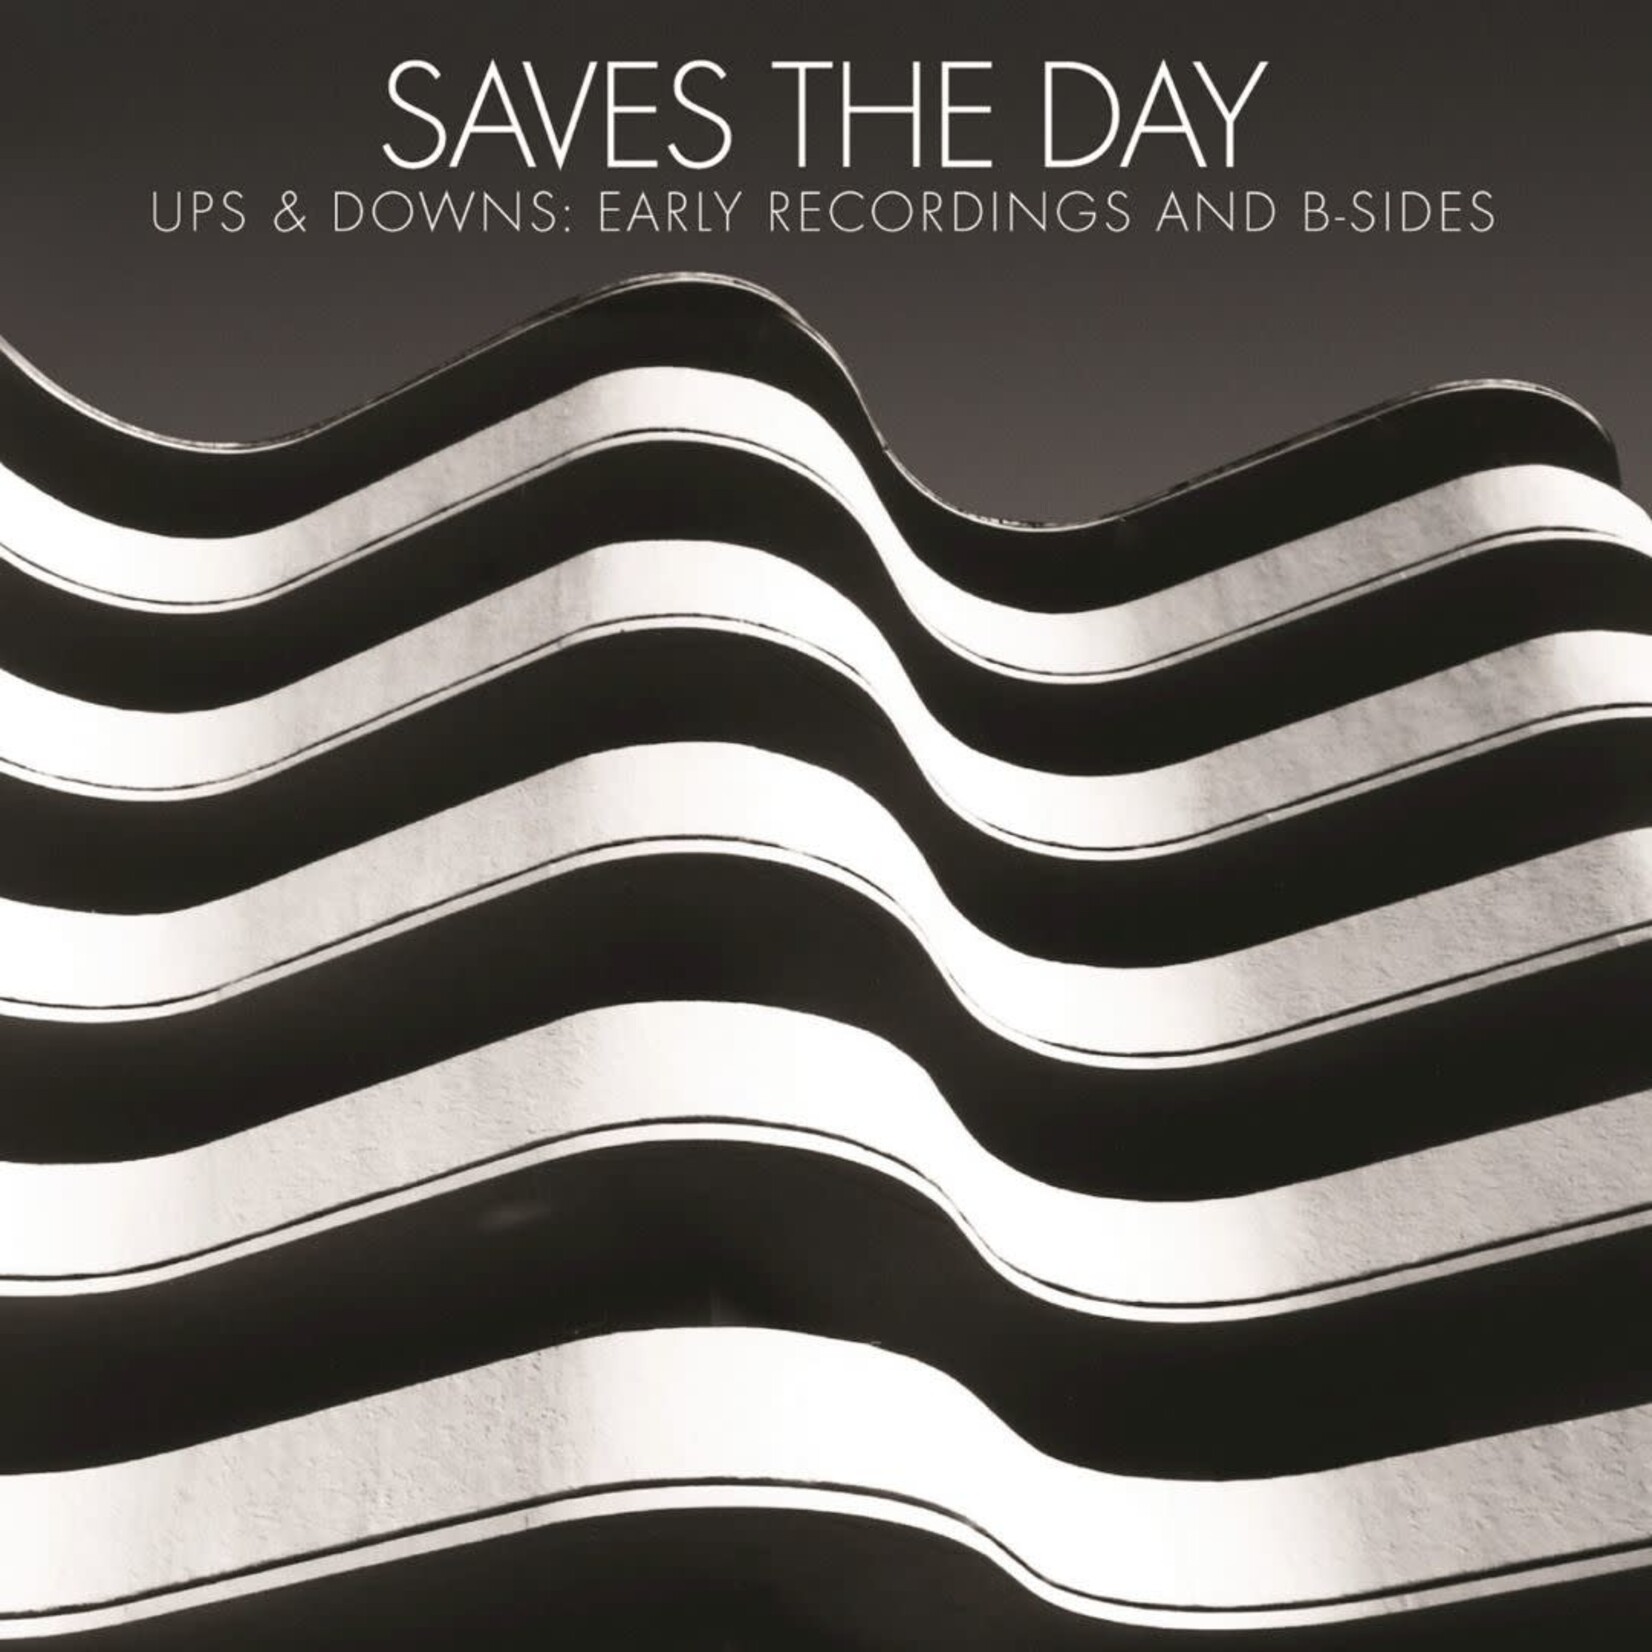 [New] Saves the Day - Ups & Downs: Early Recordings & B-Sides (opaque white vinyl)